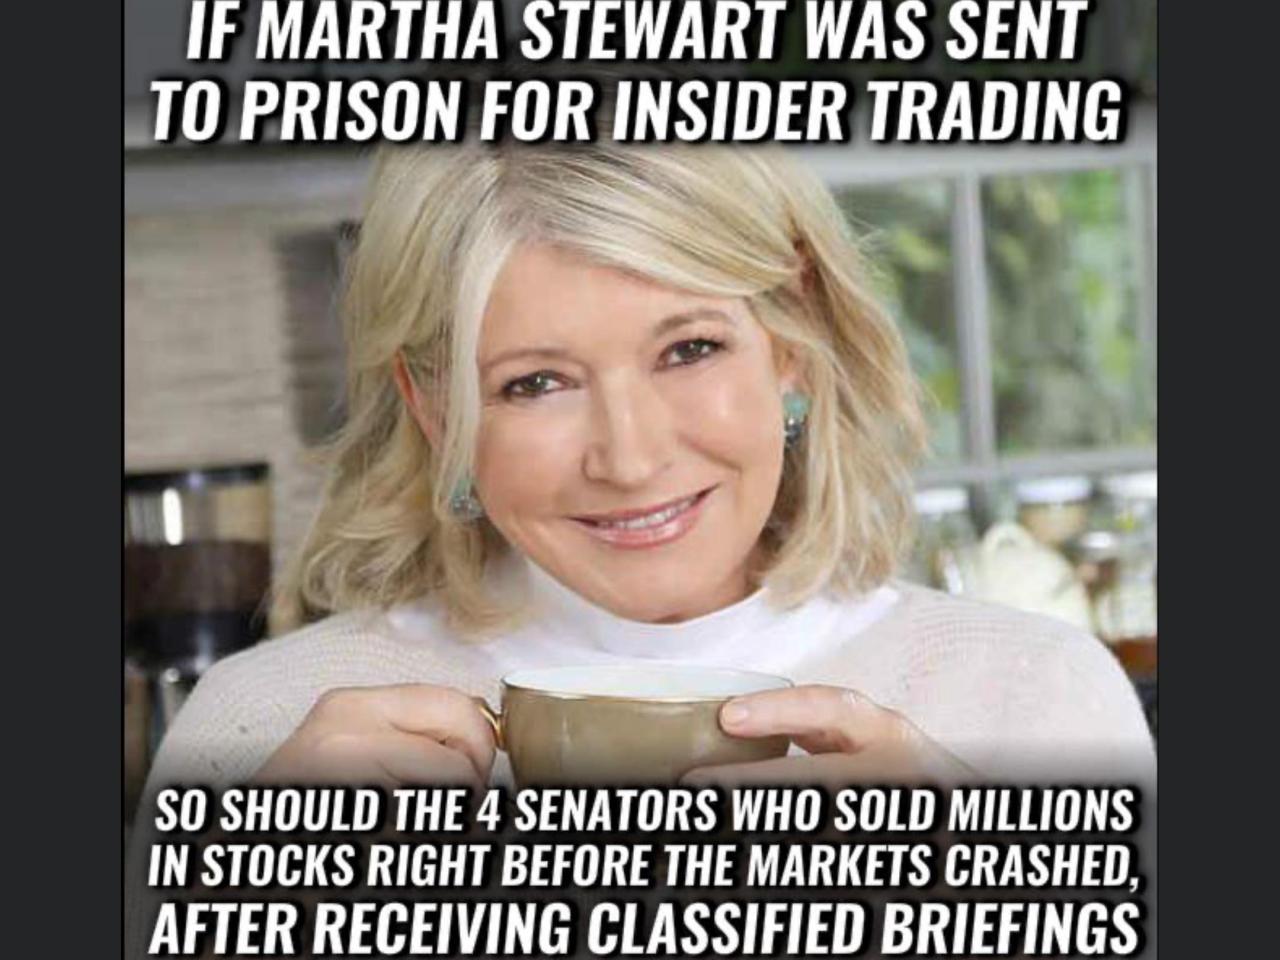 martha stewart 2020 - If Martha Stewart Was Sent To Prison For Insider Trading So Should The 4 Senators Who Sold Millions In Stocks Right Before The Markets Crashed, After Receiving Classified Briefings